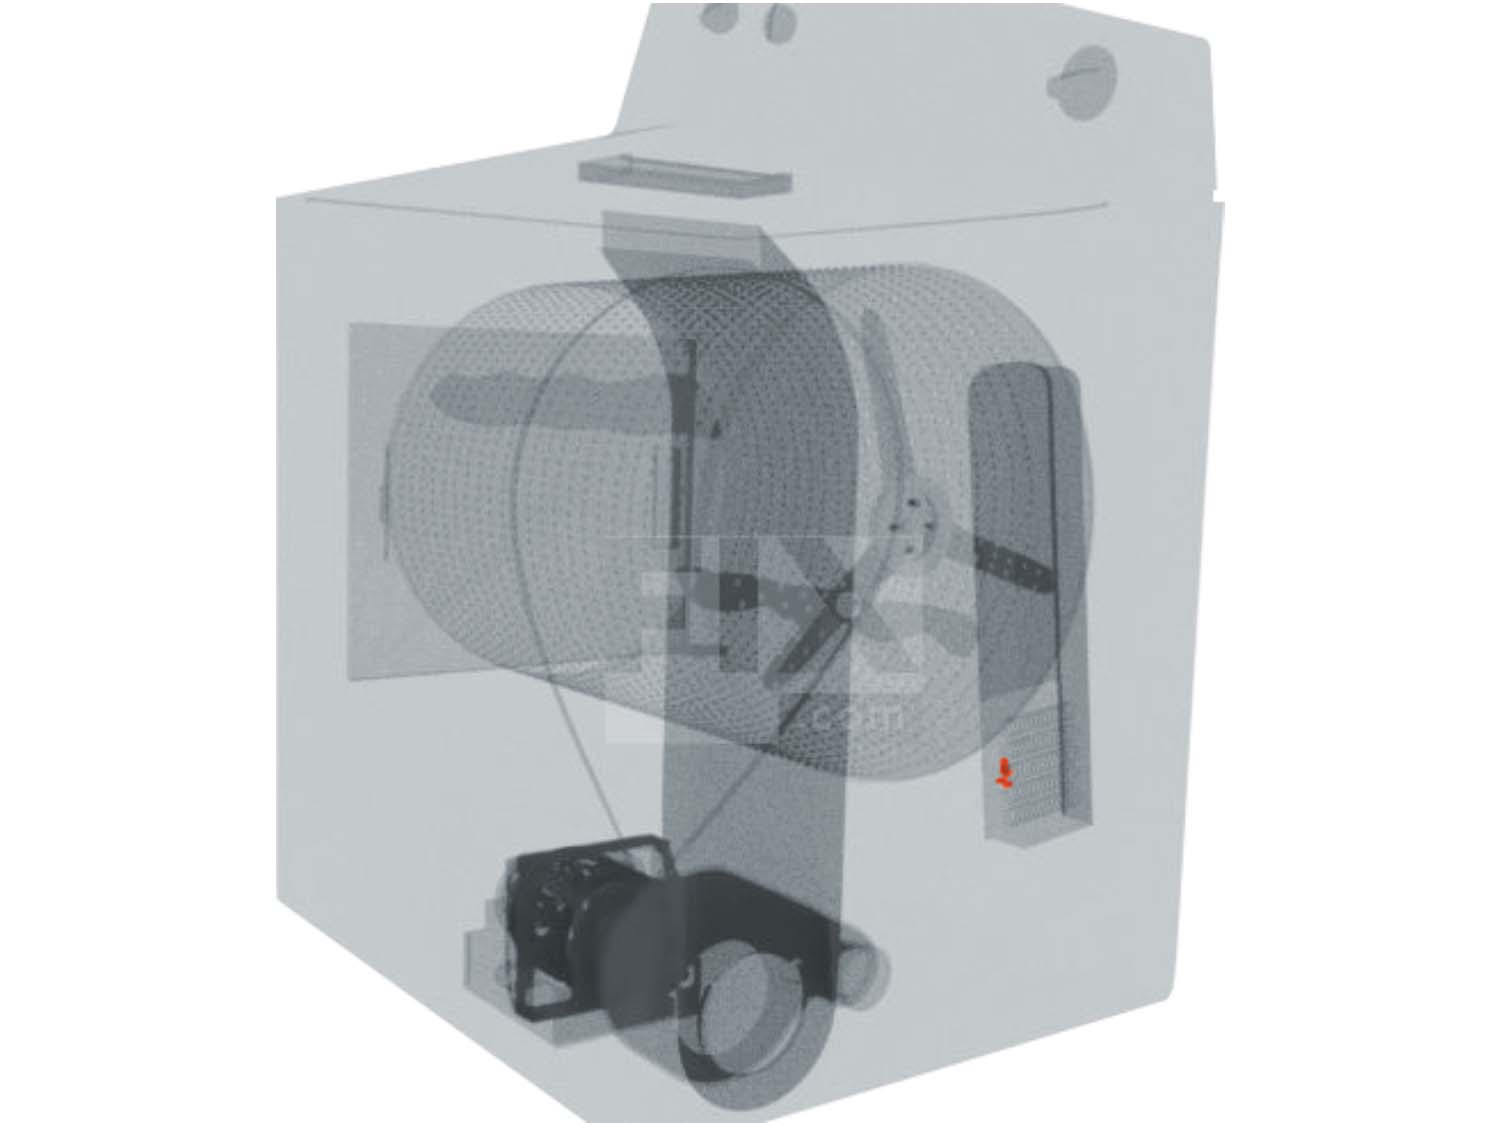 A 3D diagram showing the components of a dryer and specifying the location of the high-limit thermostat